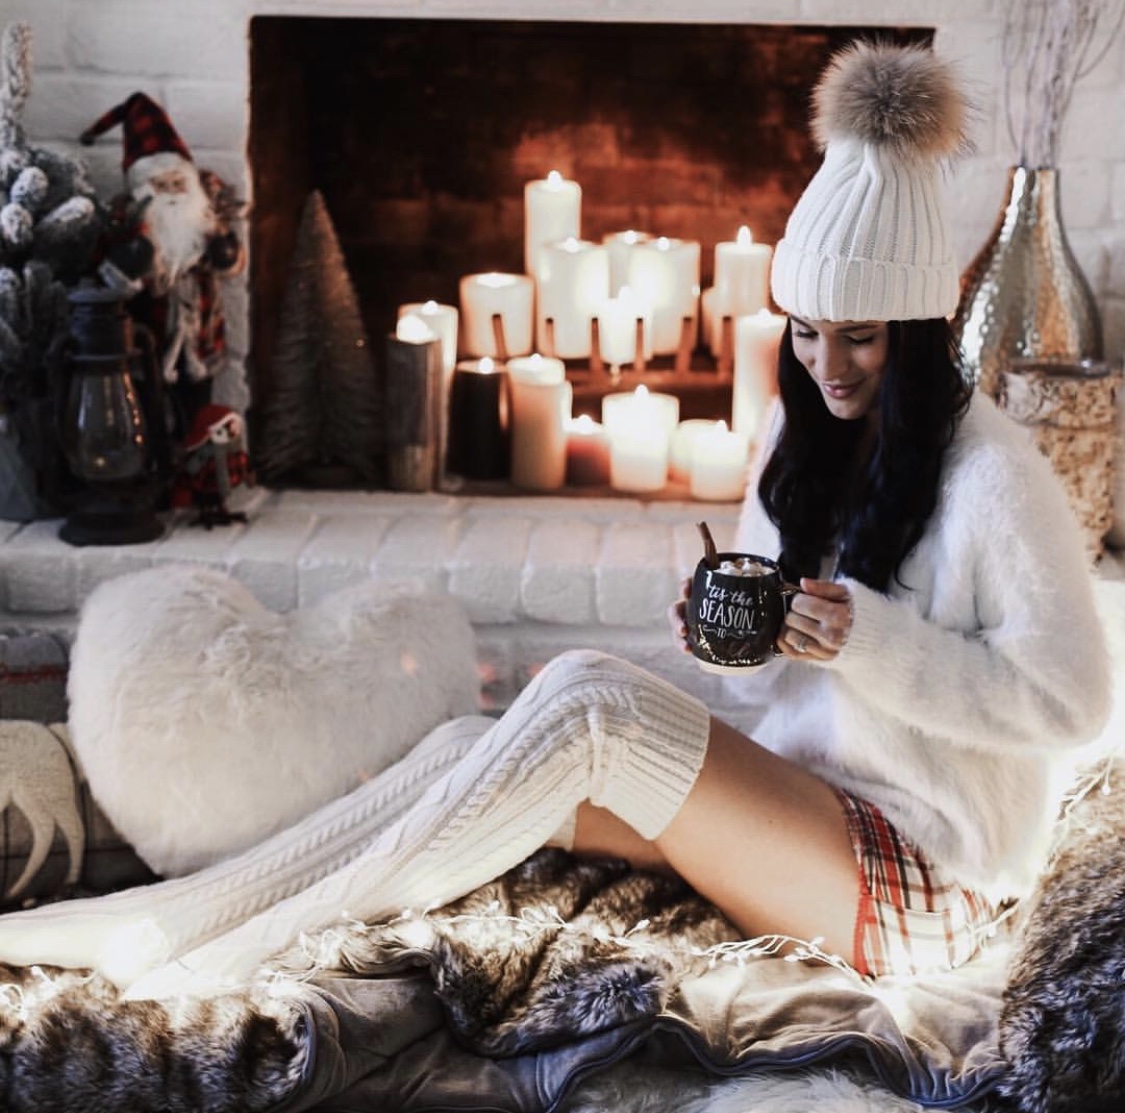 December Instagram Fashion Roundup | winter fashion tips | winter outfit ideas | winter style tips | what to wear for winter | cool weather fashion | fashion for winter | style tips for winter | outfit ideas for winter || Dressed to Kill #winterstyle #fashion #fashionblogger - Best of December Looks - Instagram Fashion Roundup by popular Austin fashion blogger Dressed to Kill